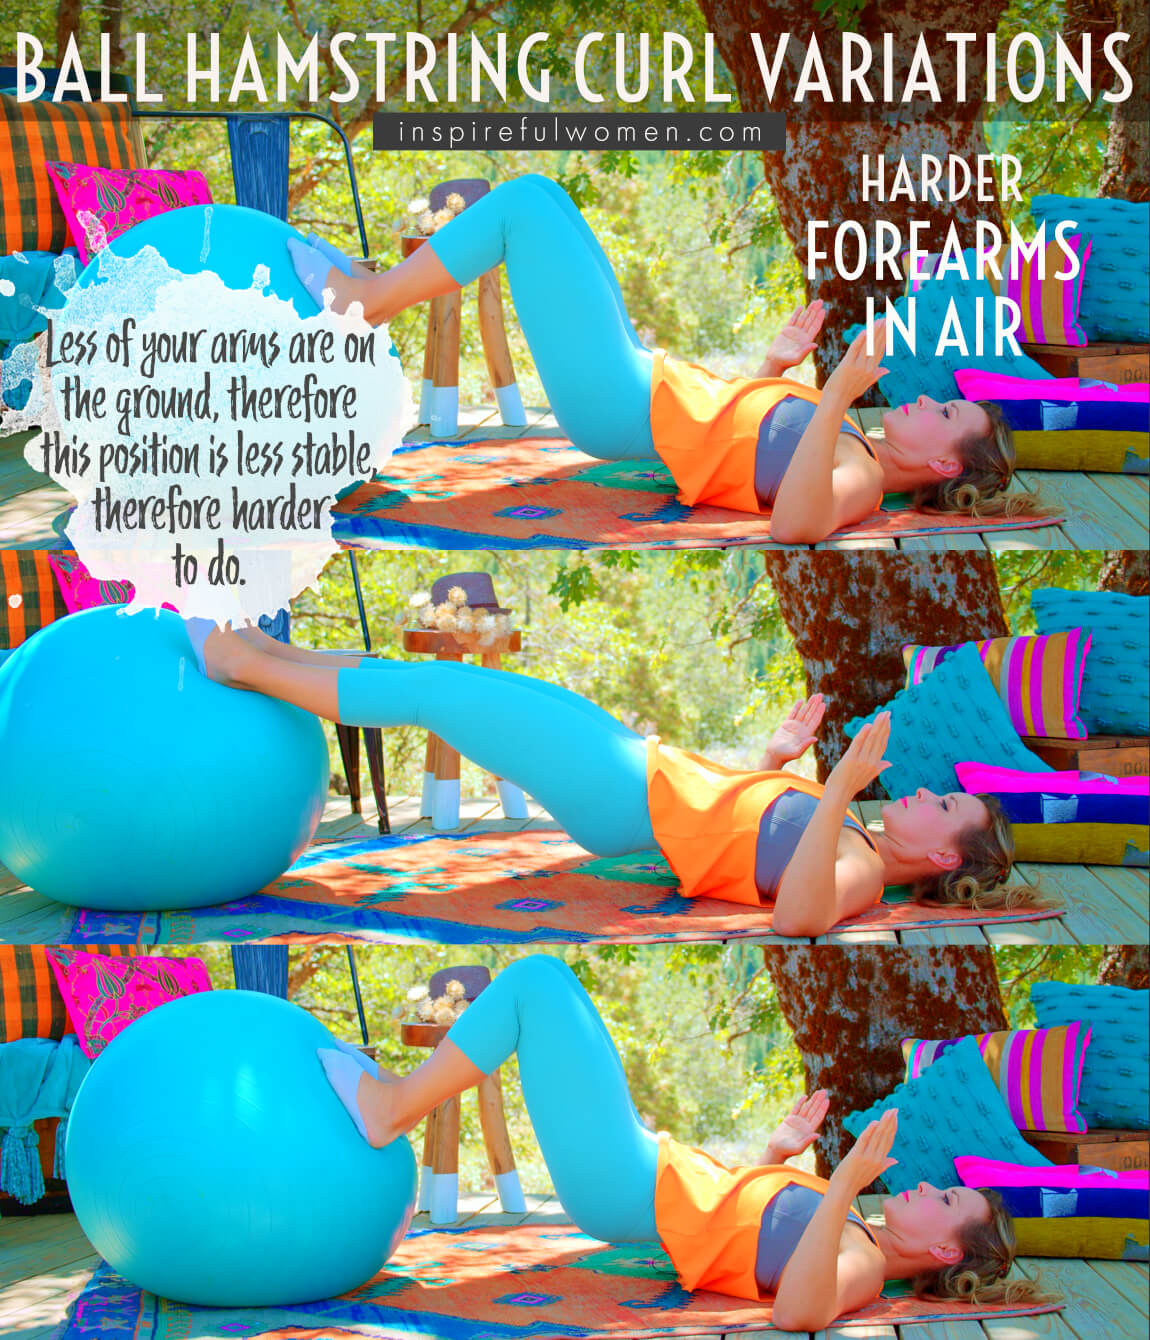 forearms-in-air-hamstring-leg-curl-stability-ball-home-bodyweight-exercise-harder